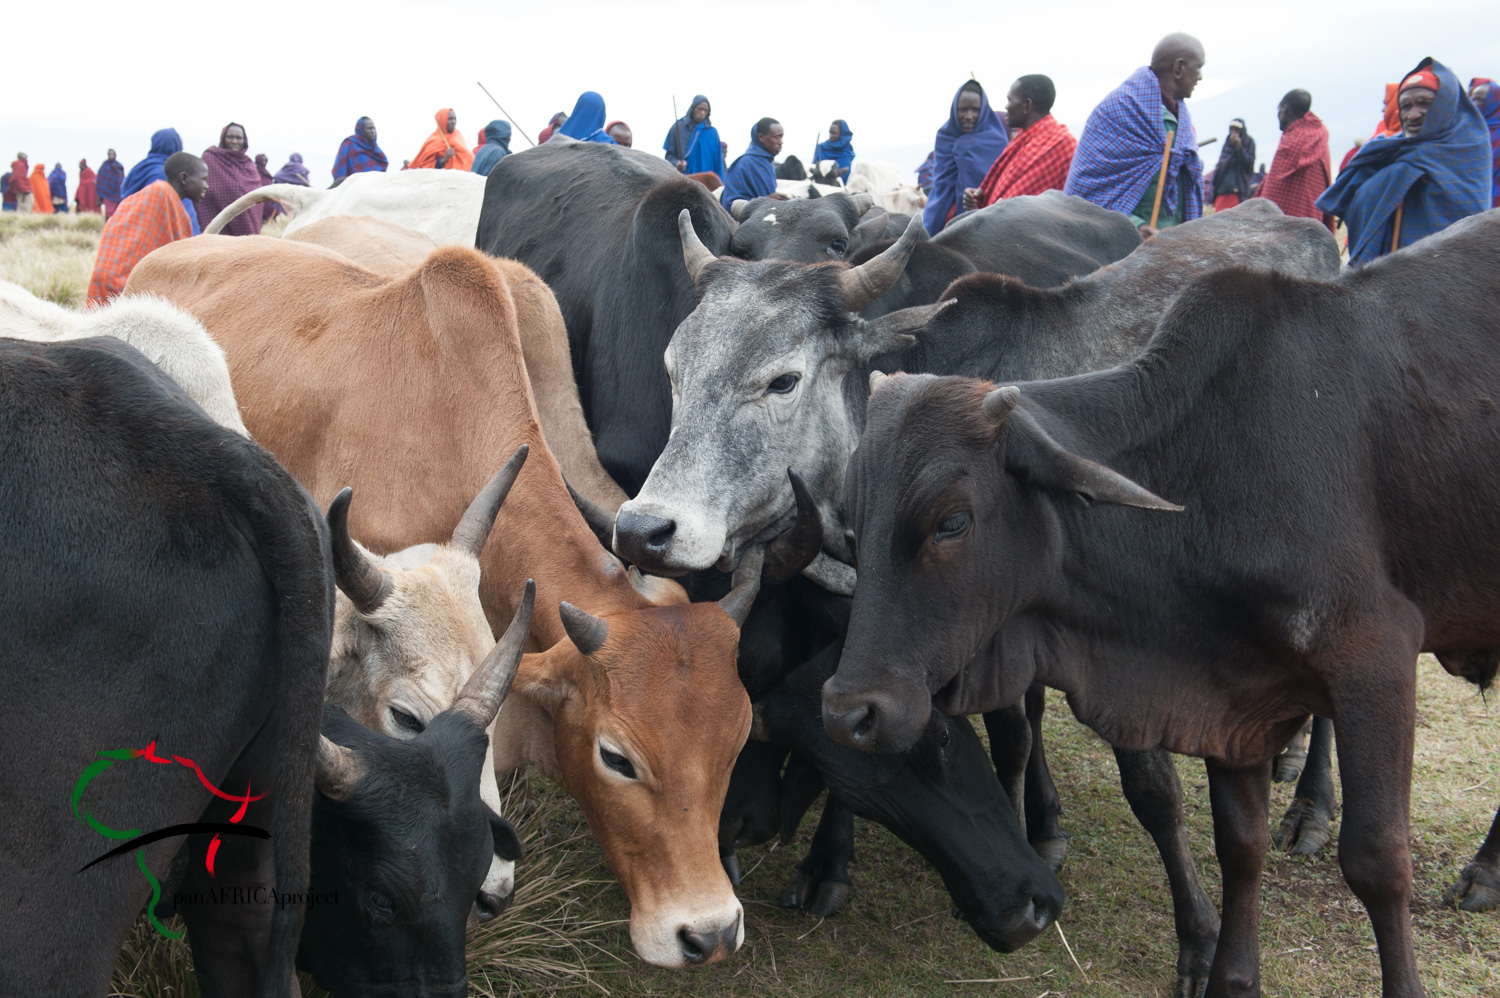 Men from the Maasai tribe with cattle